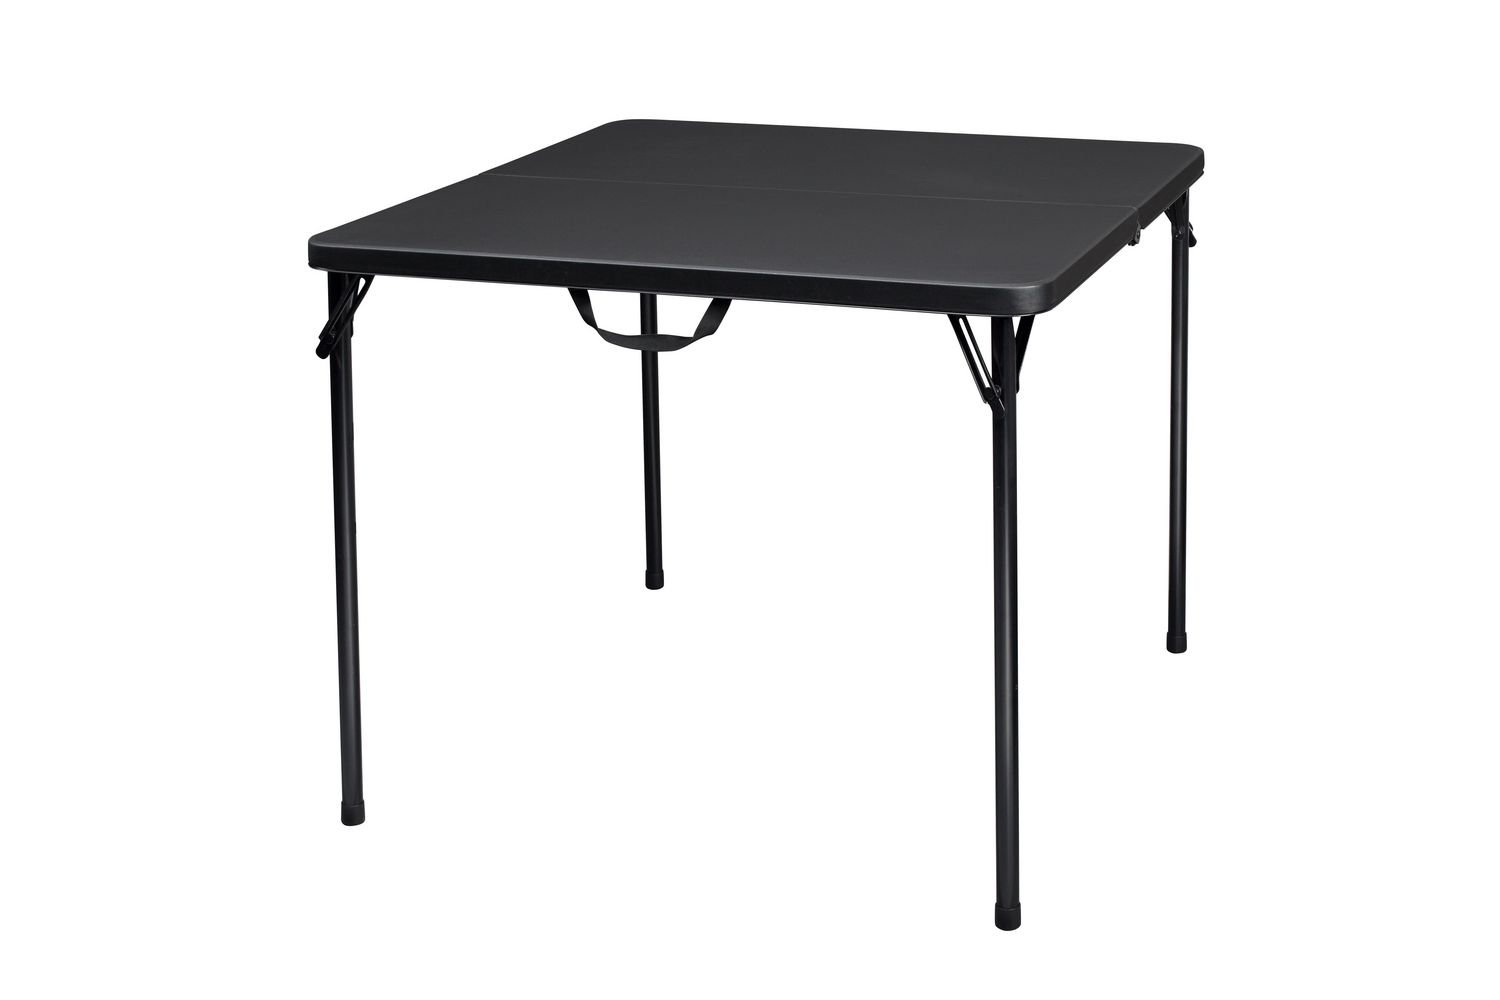 Mainstays Square Foldable Table Walmart Canada